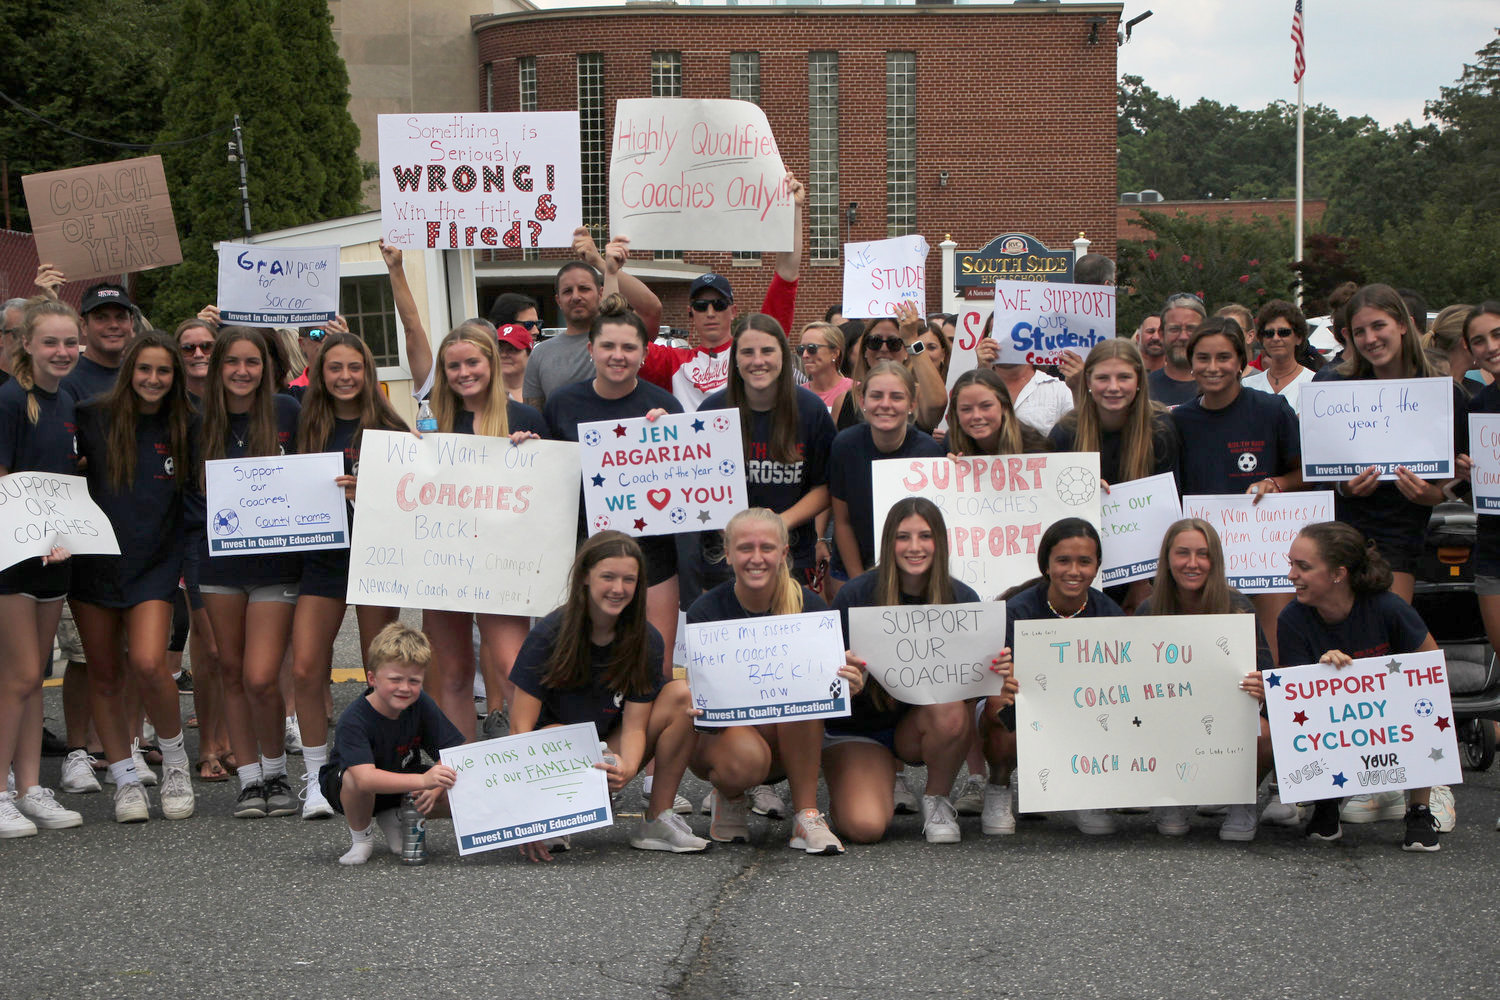 Student-athletes, teachers, coaches, parents, and community members gathered outside South Side High School in July 2021 to protest the Board of Education’s decision not to rehire girls’ soccer coach Jennifer Abgarian and assistant coach Chris Aloisi.